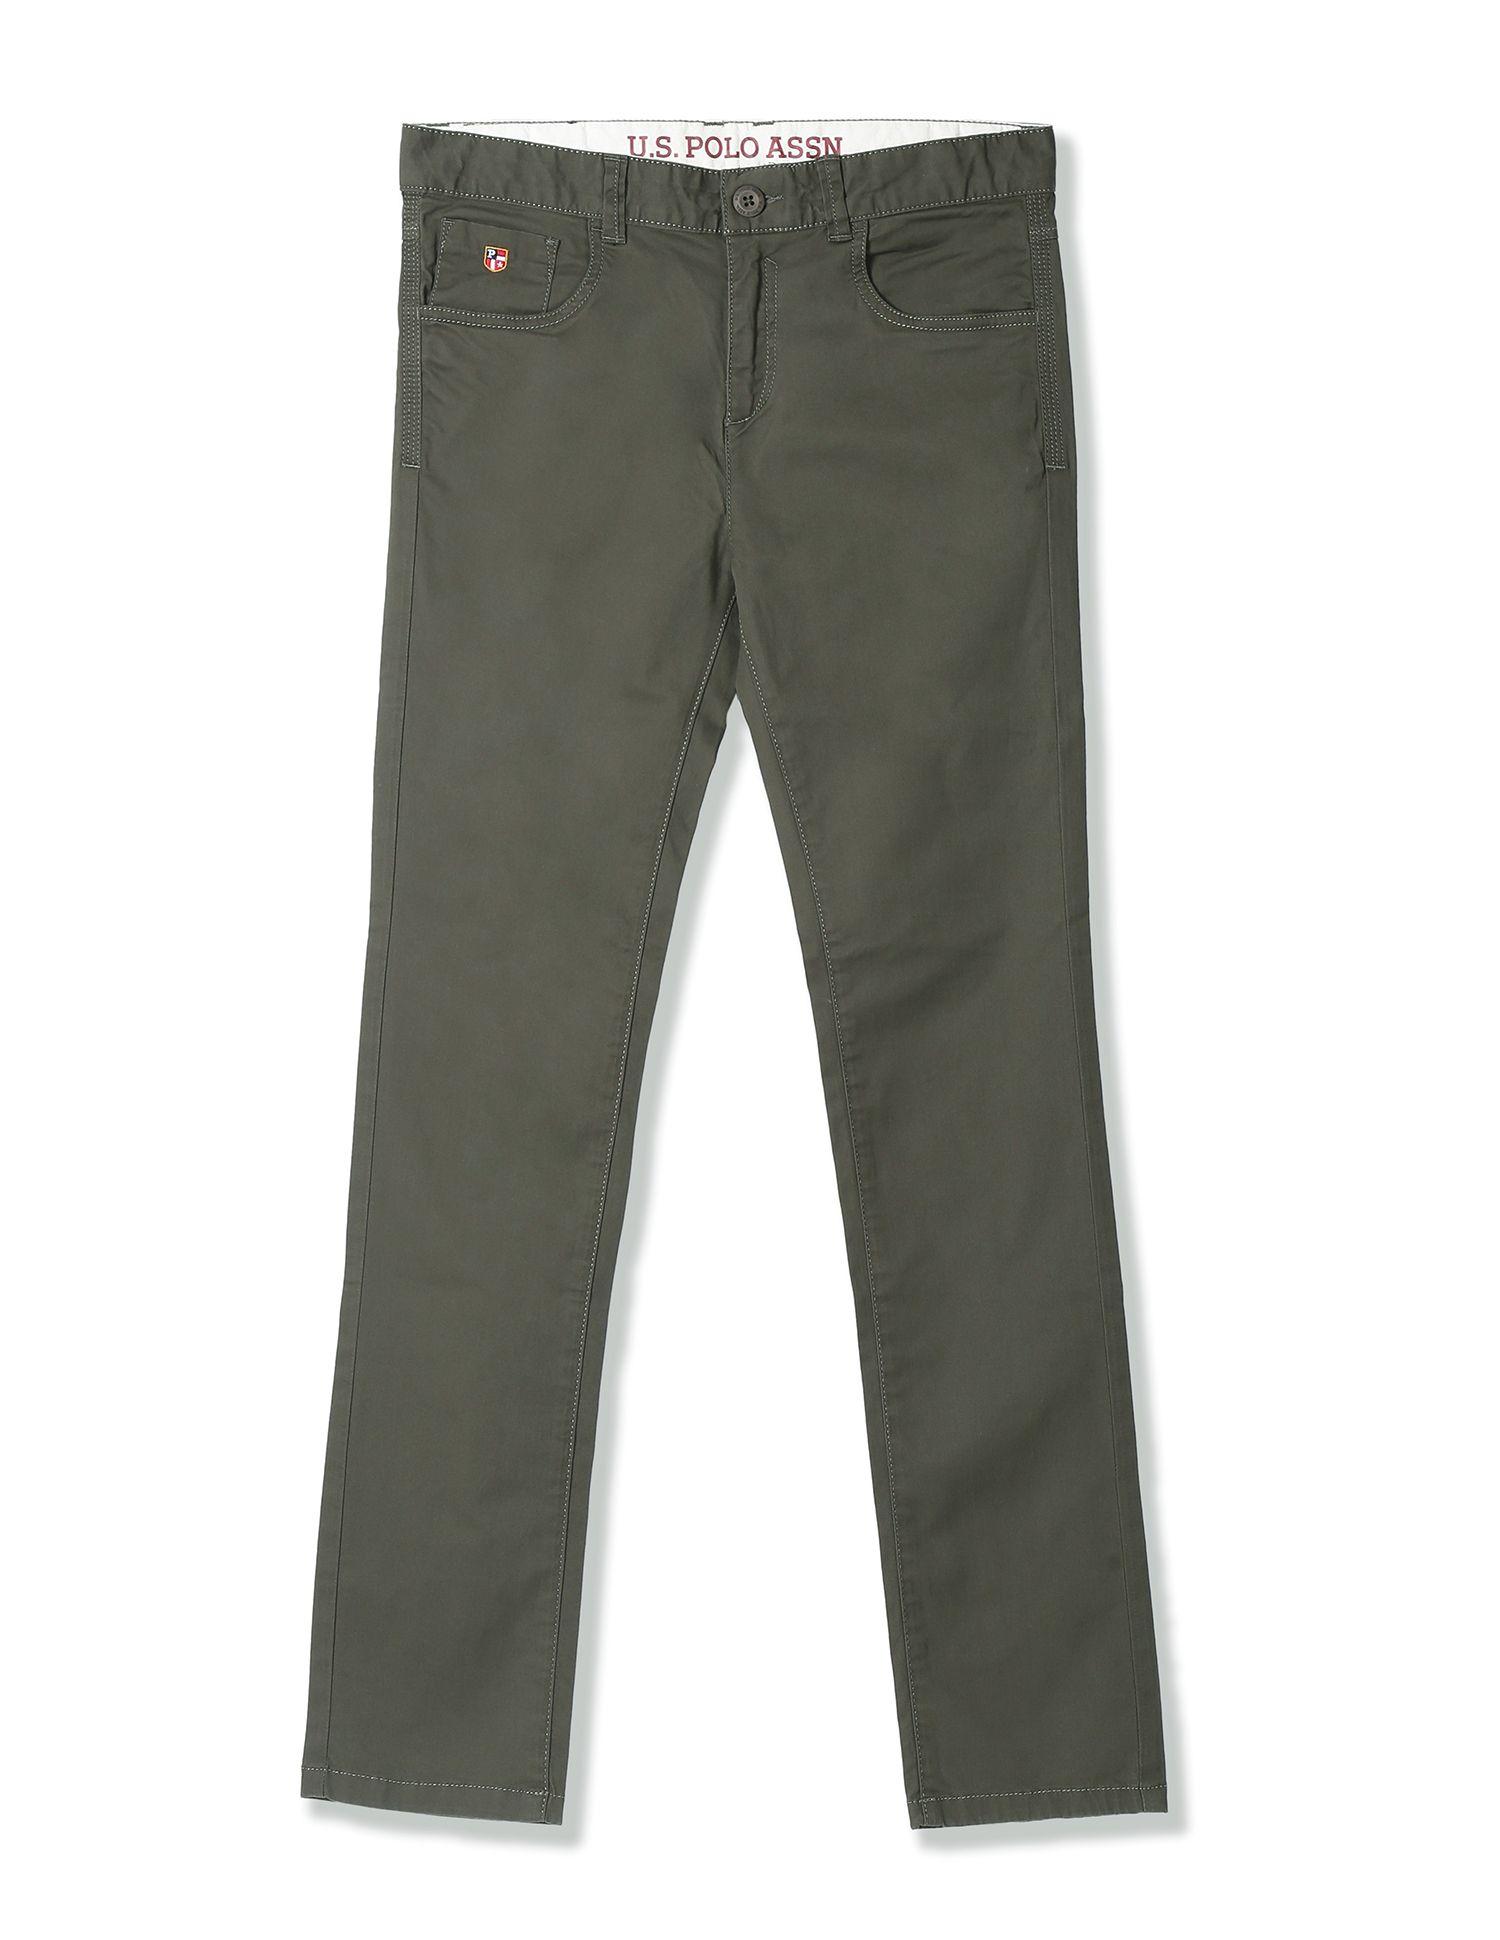 u.s. polo assn. kids boys olive green regular fit solid chinos